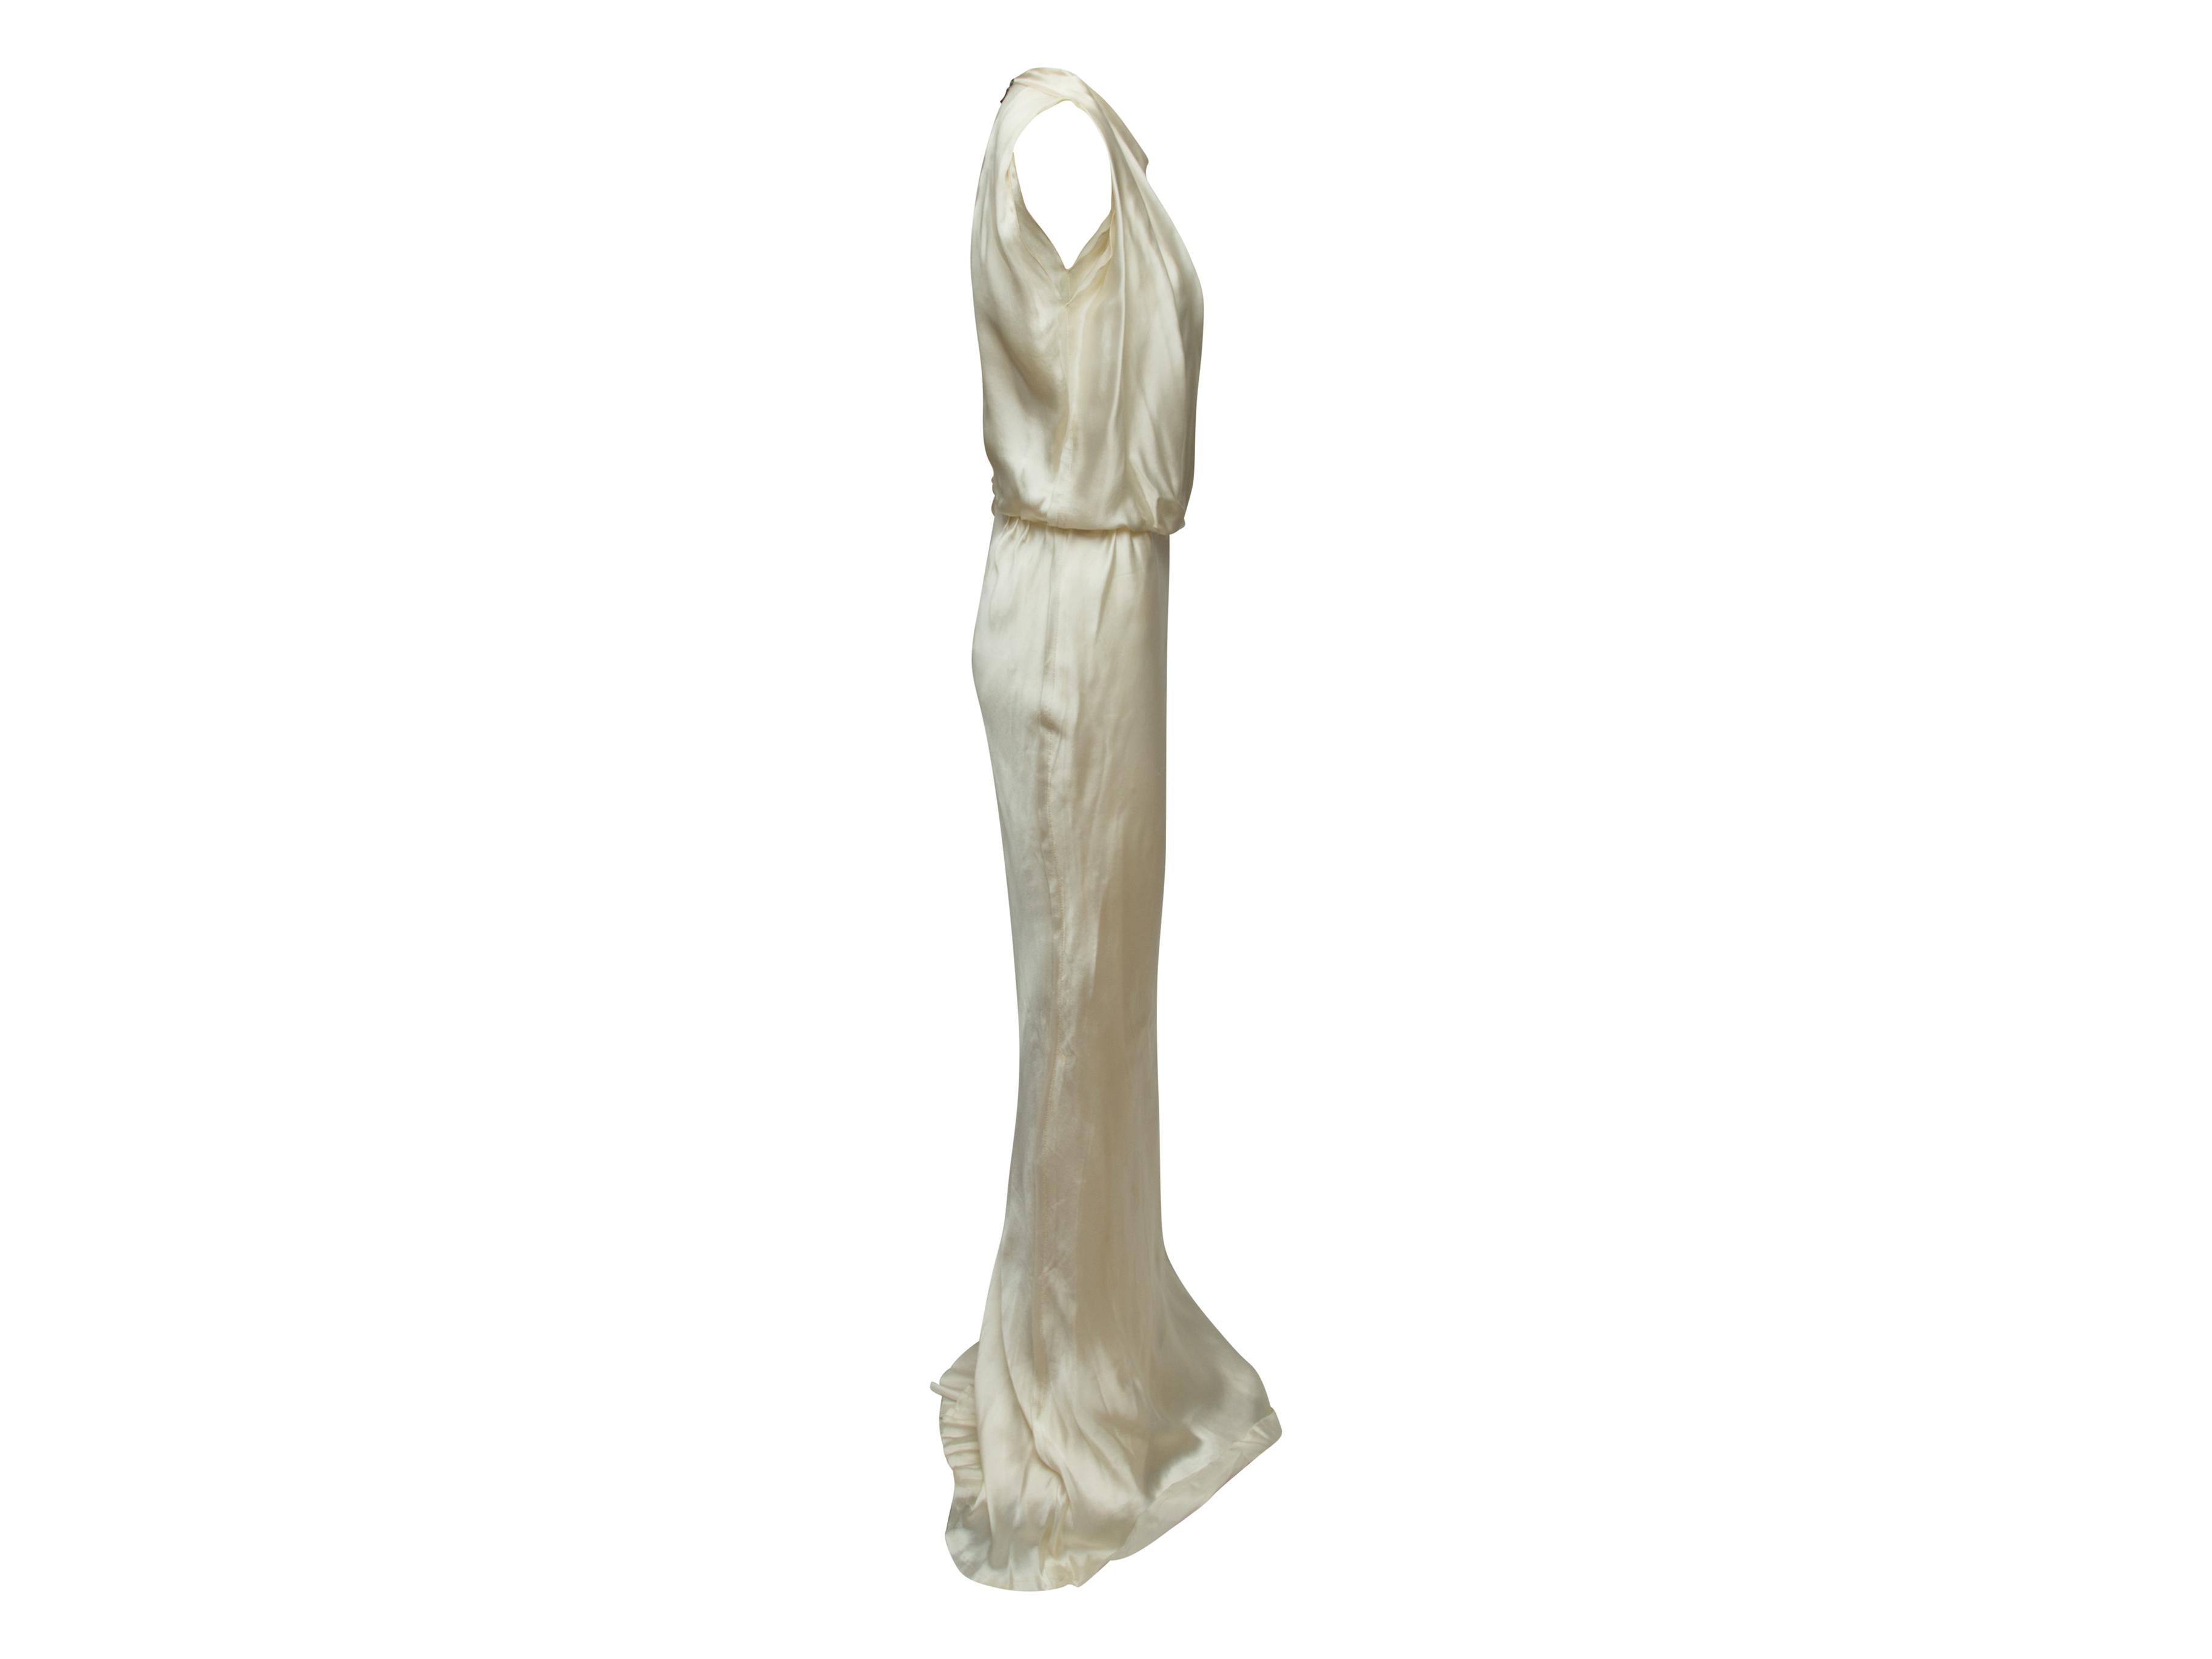 Product details: Cream silk sleeveless evening gown by Lanvin. From the Summer 2009 Collection. Crew neck. Exposed zip closure at center back. 34